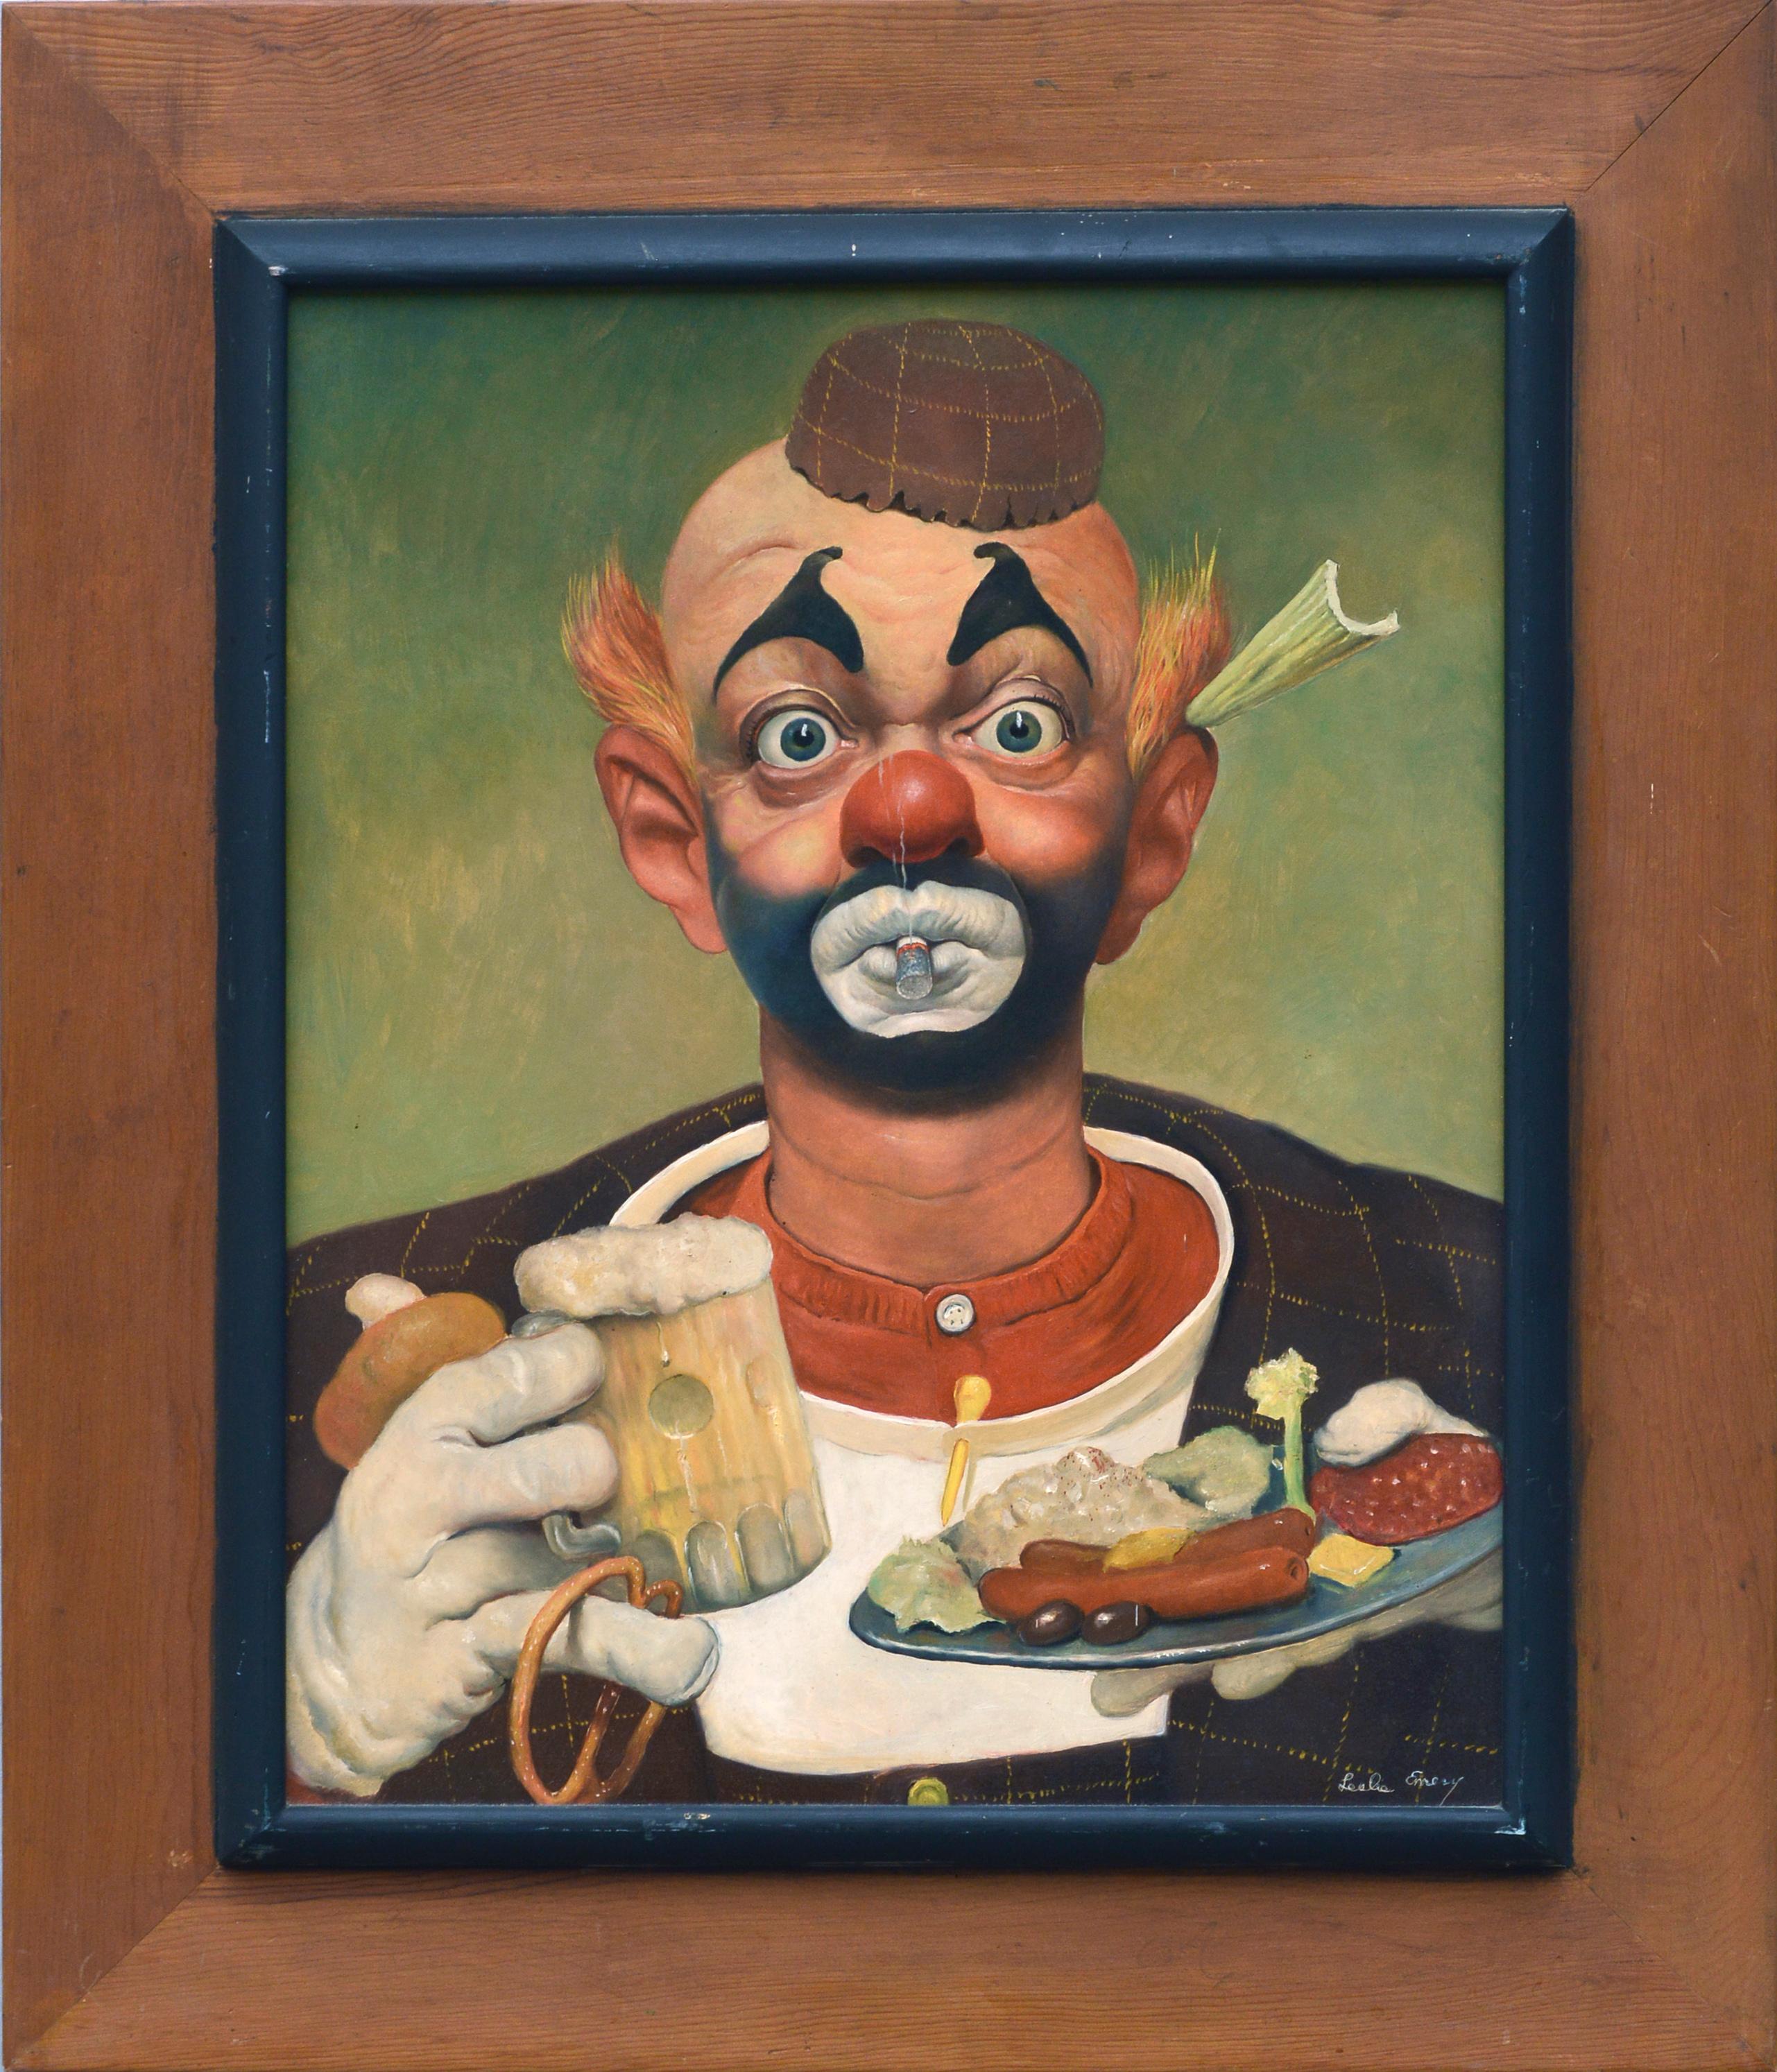 Leslie Emery Figurative Painting - "Buffet" - Portrait of a Clown with Food and Beer